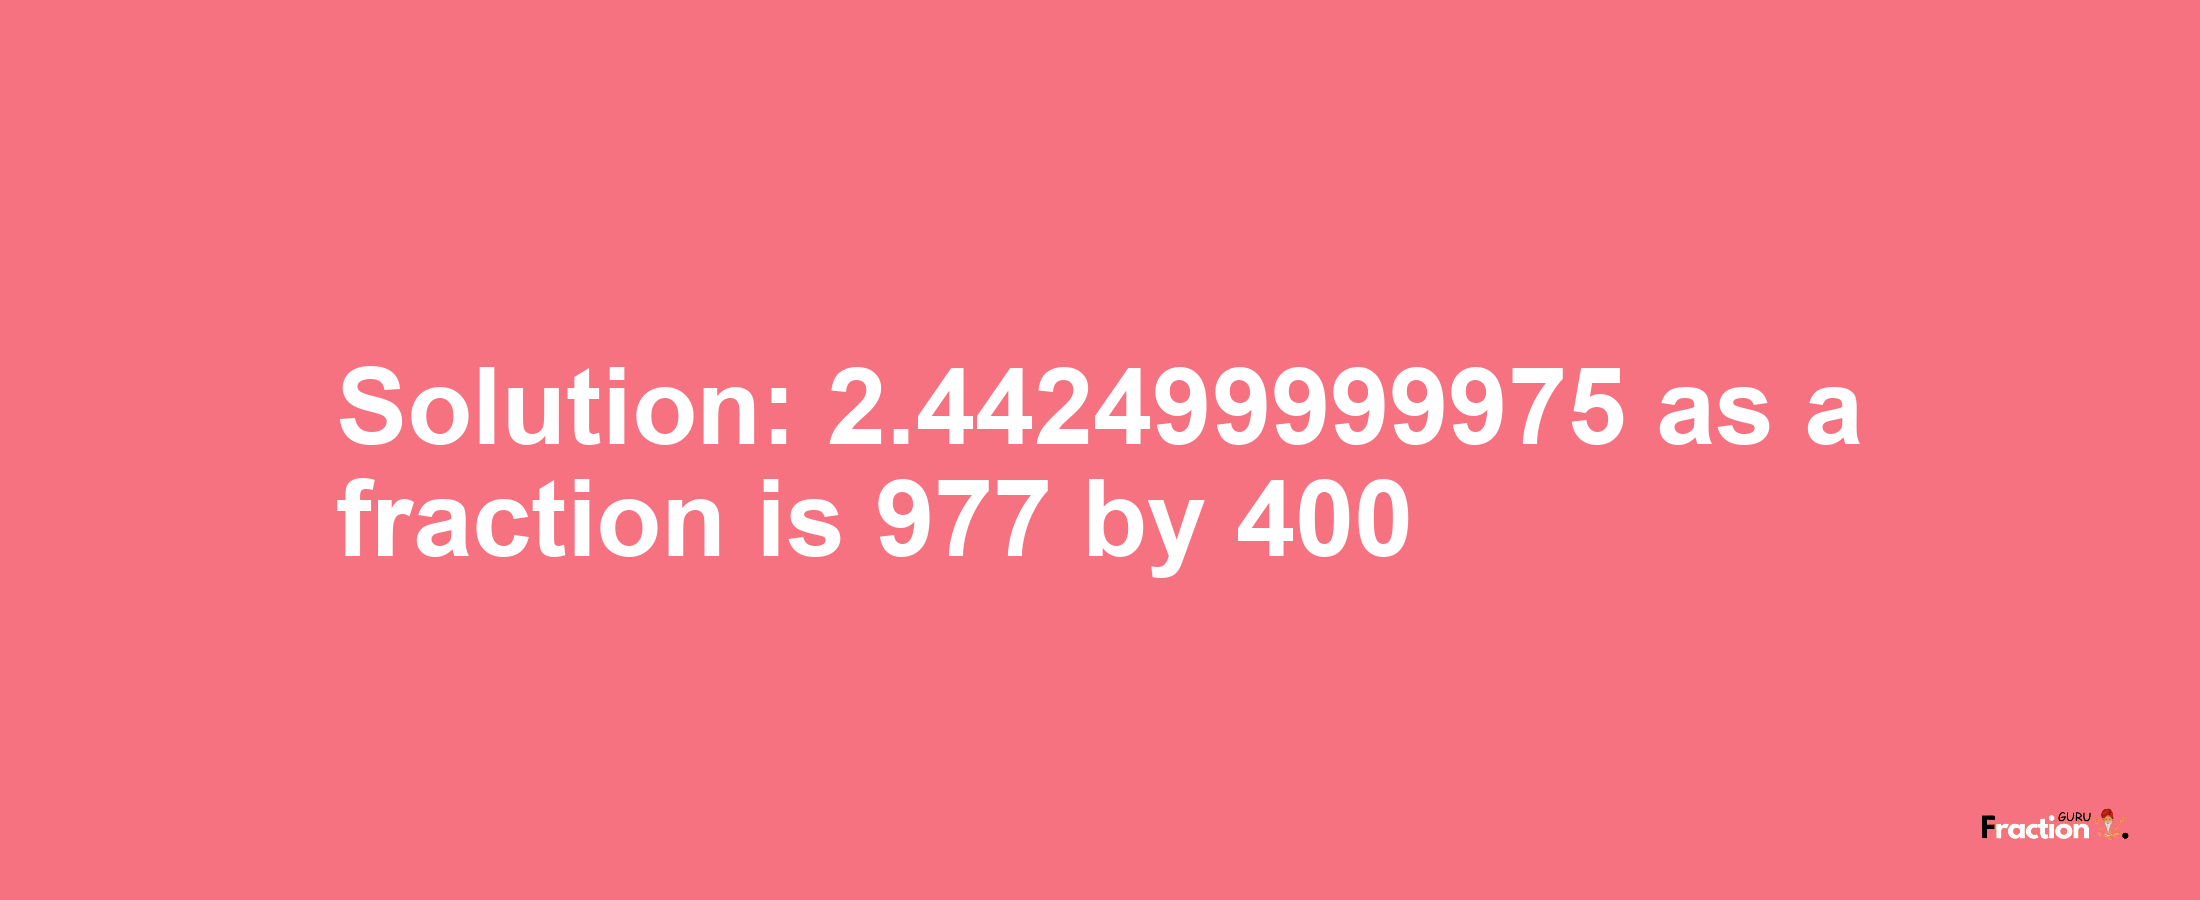 Solution:2.442499999975 as a fraction is 977/400